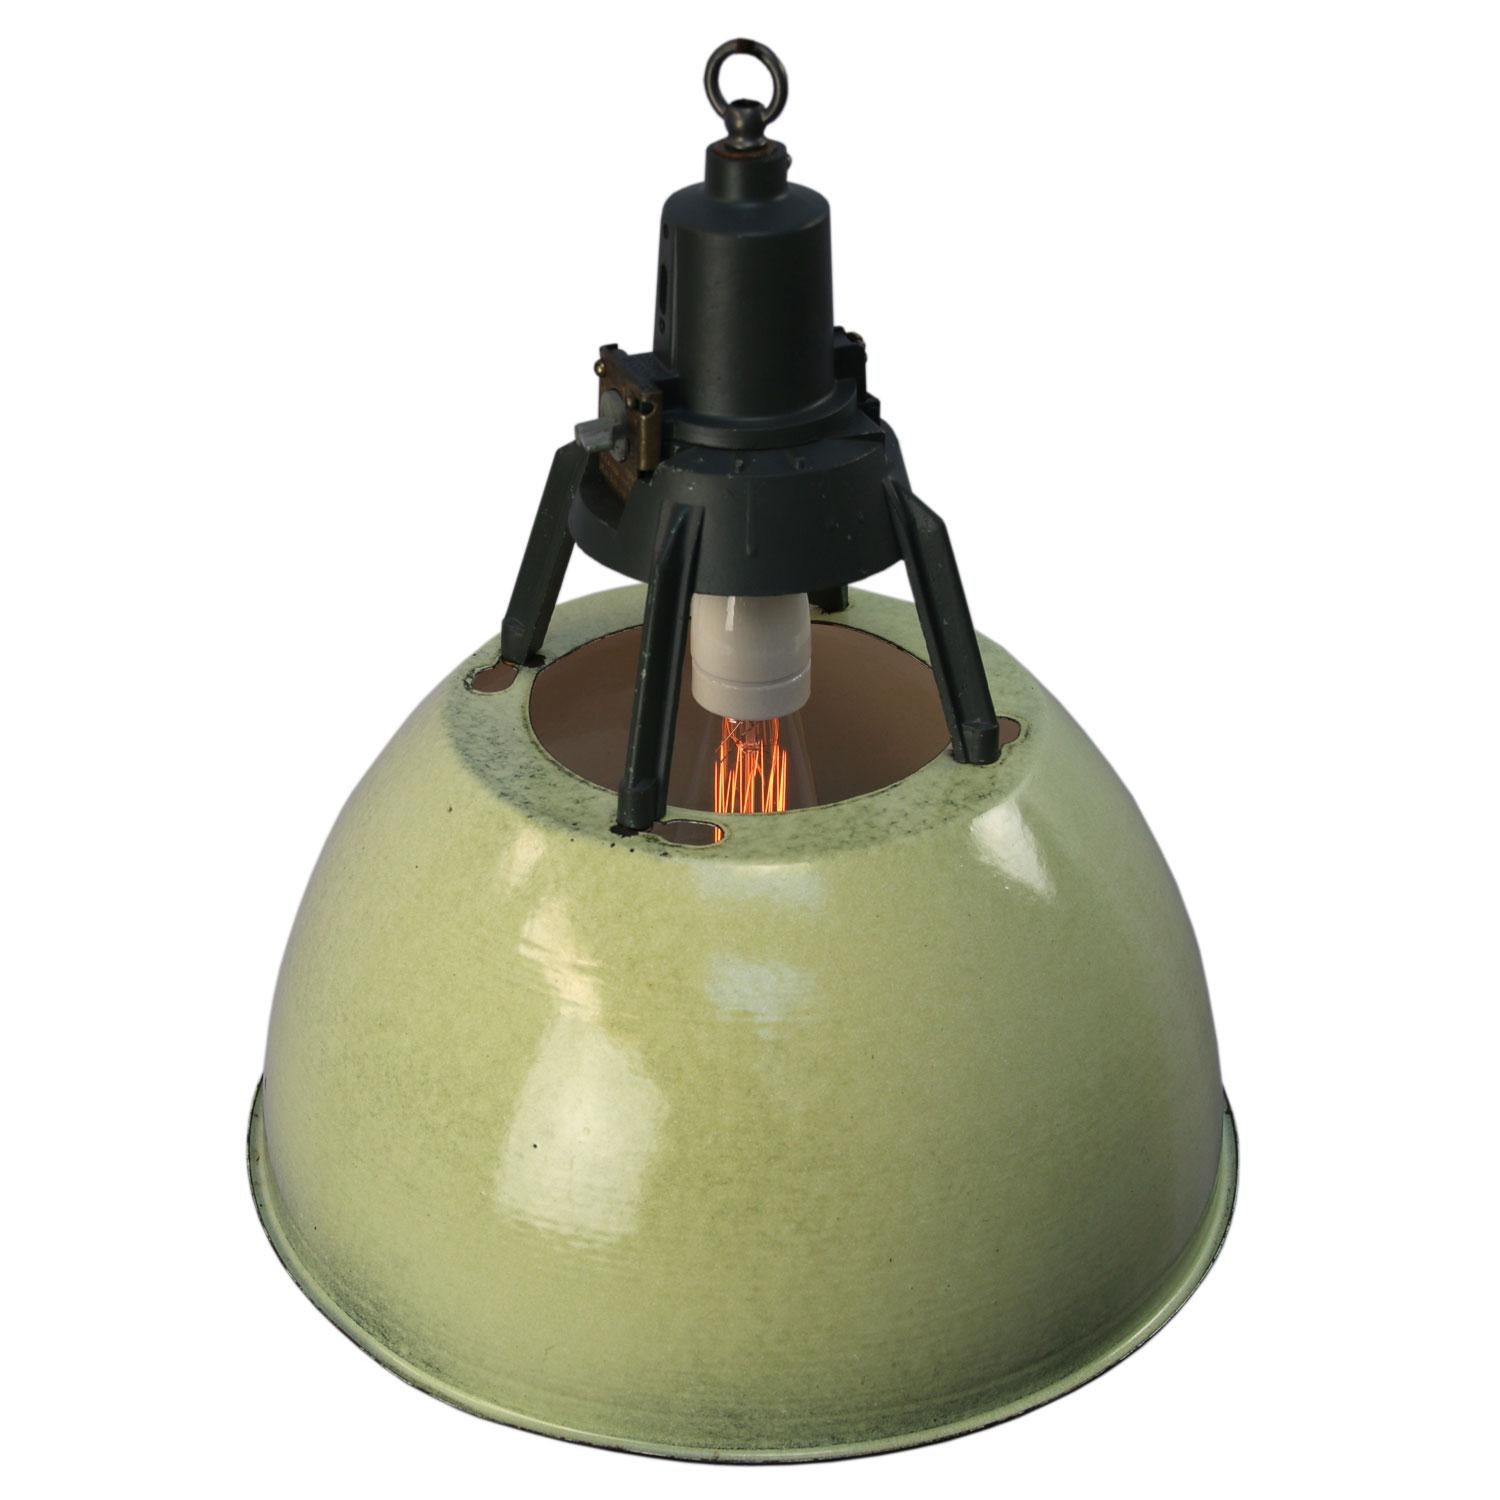 Enamel industrial pendant.
Green enamel shade, white inside.
Dark grey cast aluminum top.

Weight: 2.90 kg / 6.4 lb

Priced per individual item. All lamps have been made suitable by international standards for incandescent light bulbs,